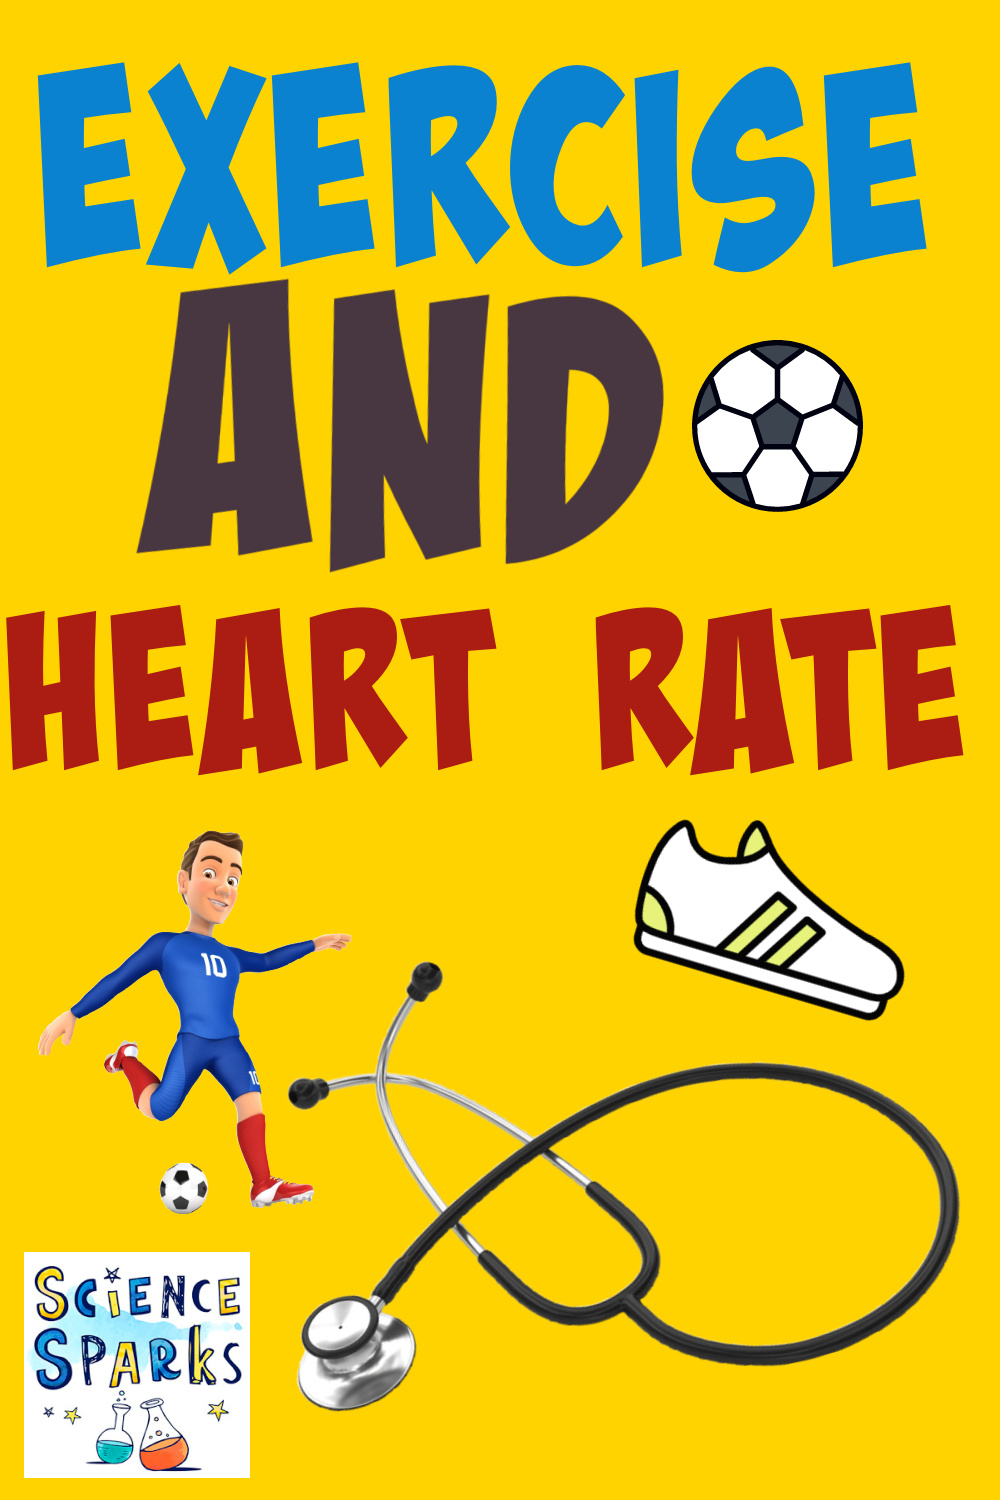 How does exercise affect heart rate? Science for Kids